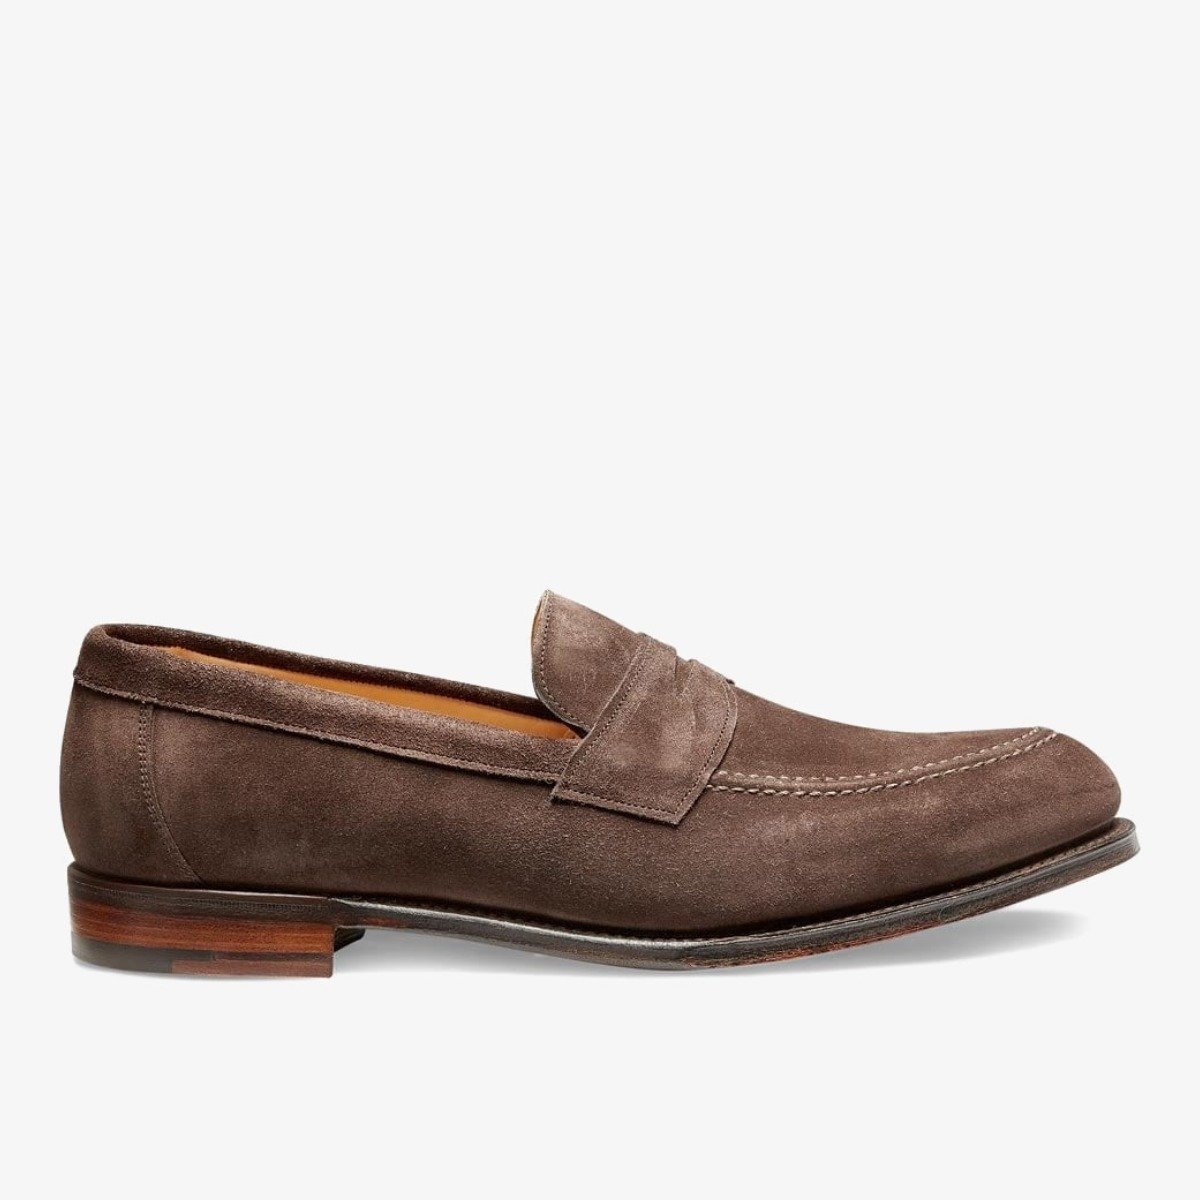 Cheaney Hadley brown suede penny loafers